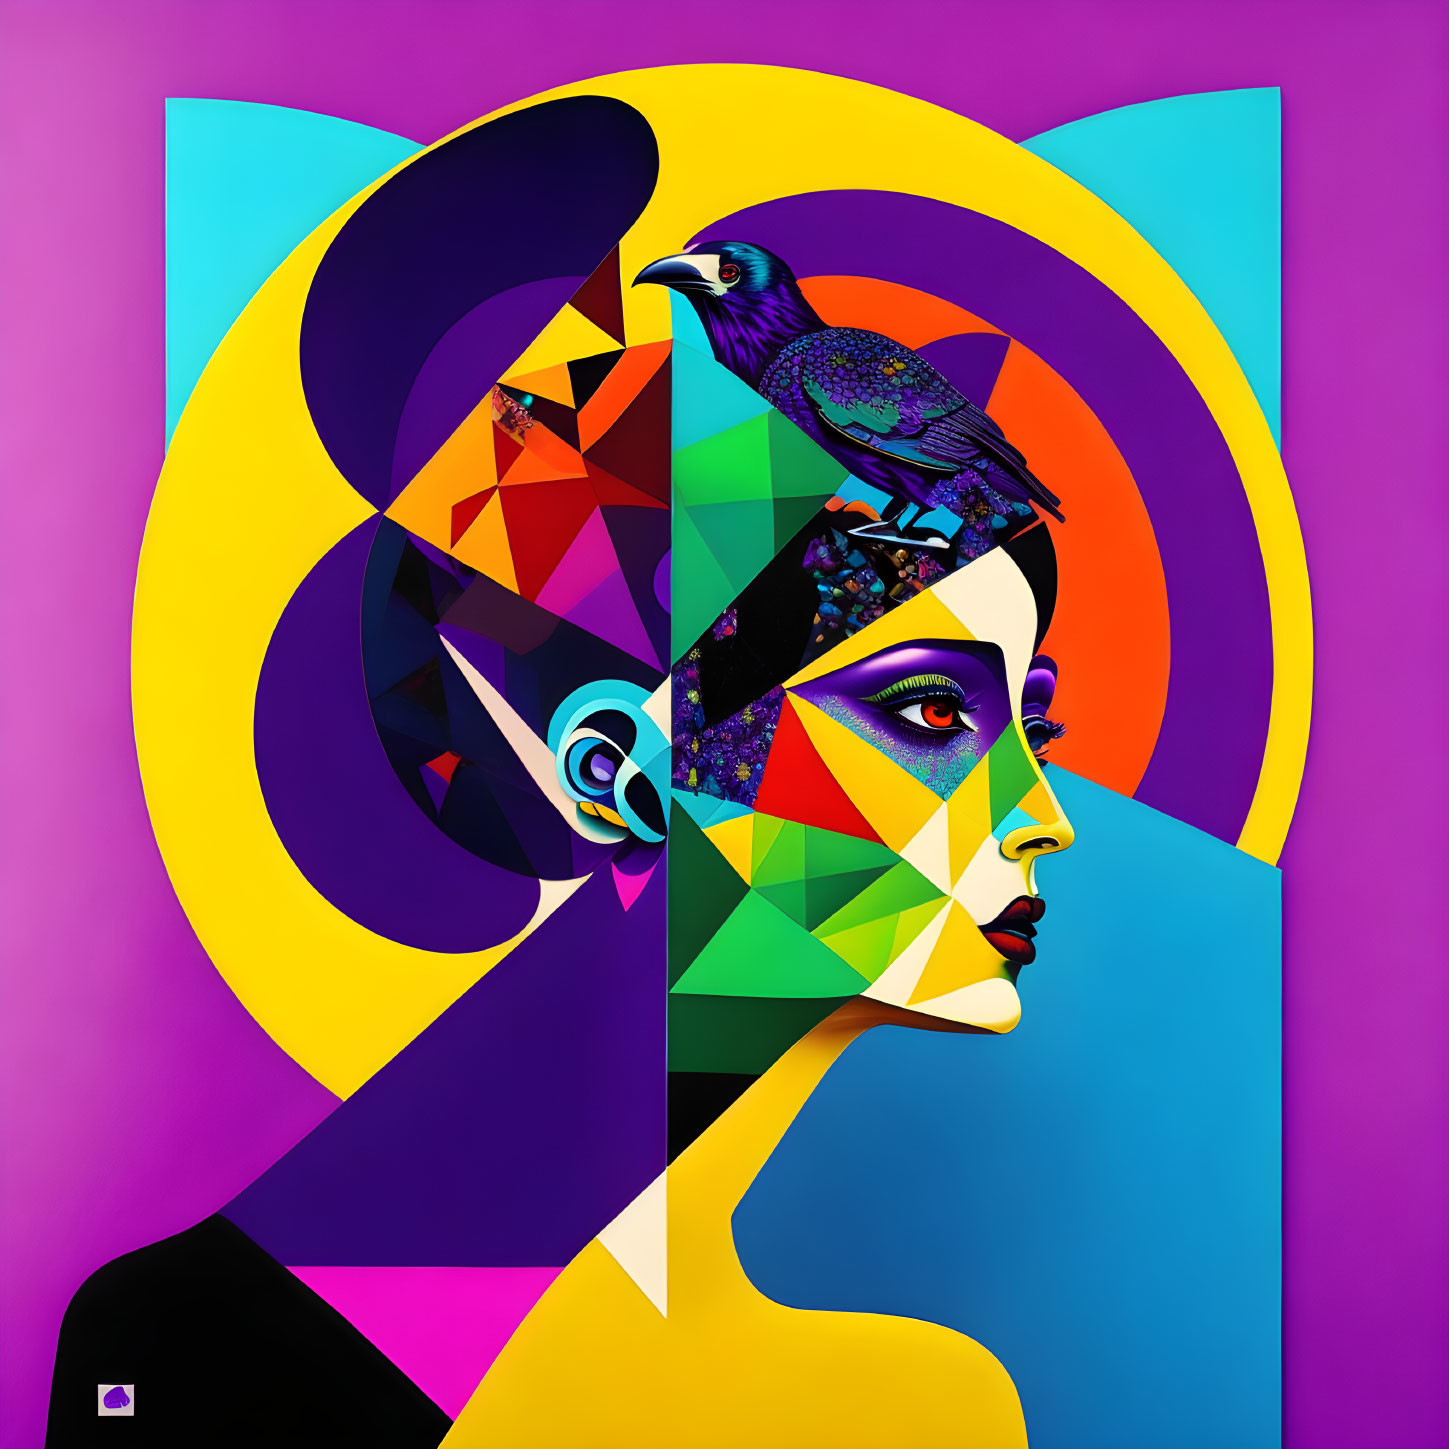 Colorful Digital Artwork: Woman's Profile with Geometric Patterns and Crow on Head